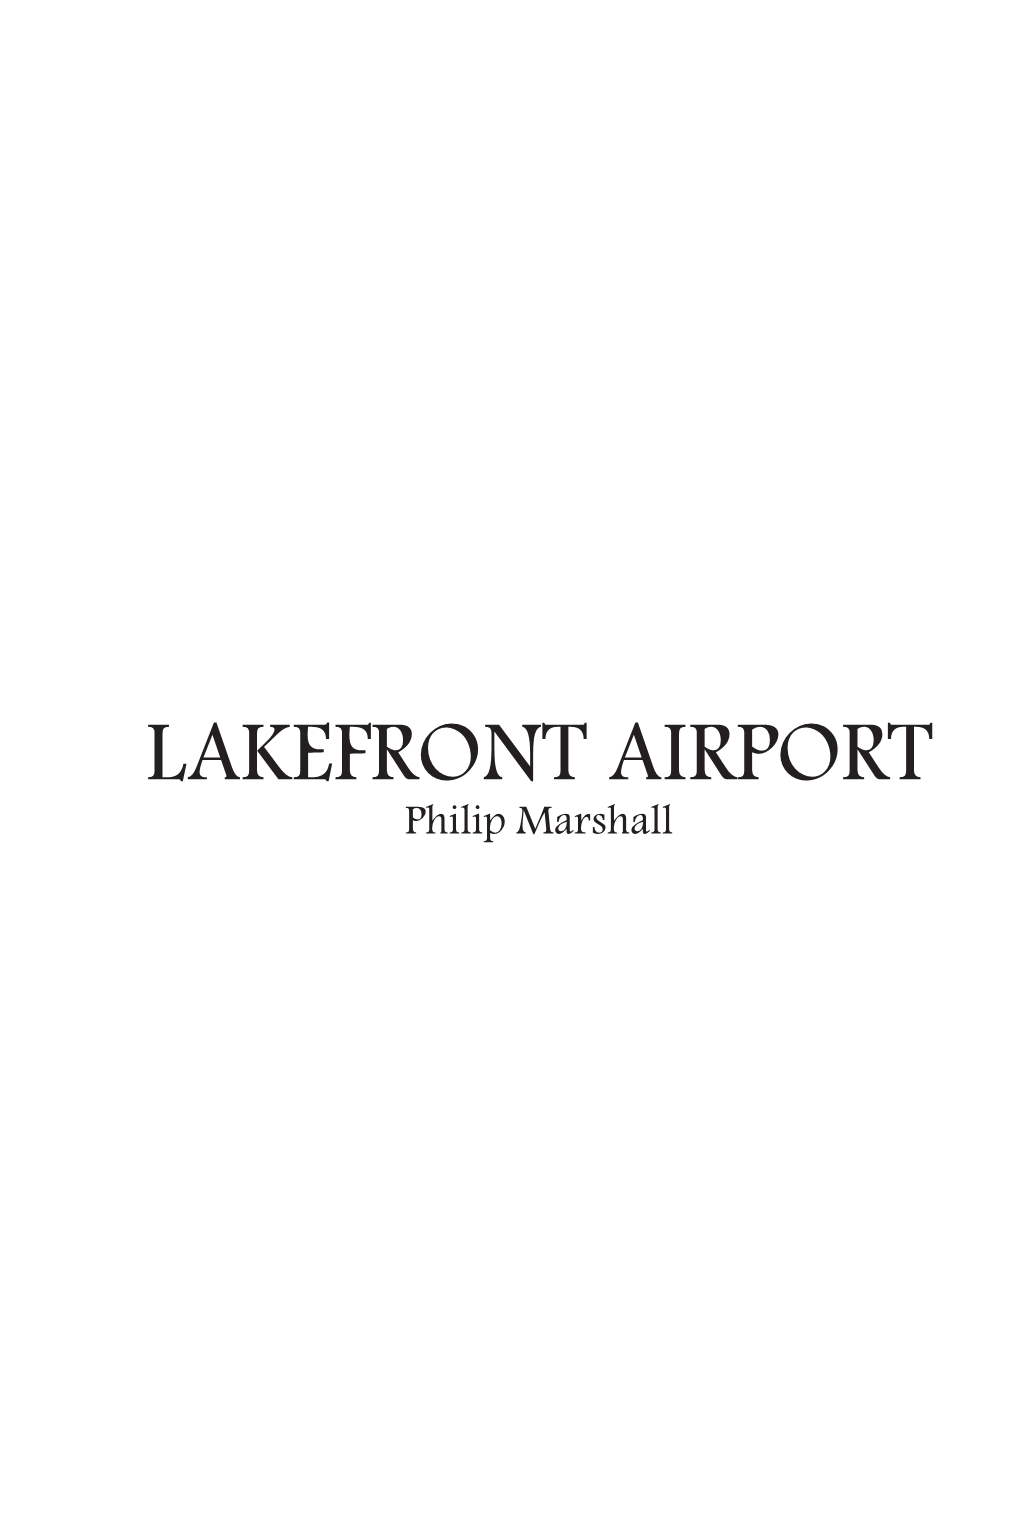 LAKEFRONT AIRPORT Philip Marshall Copyright © 2013 by Phillip Marshall All Rights Reserved